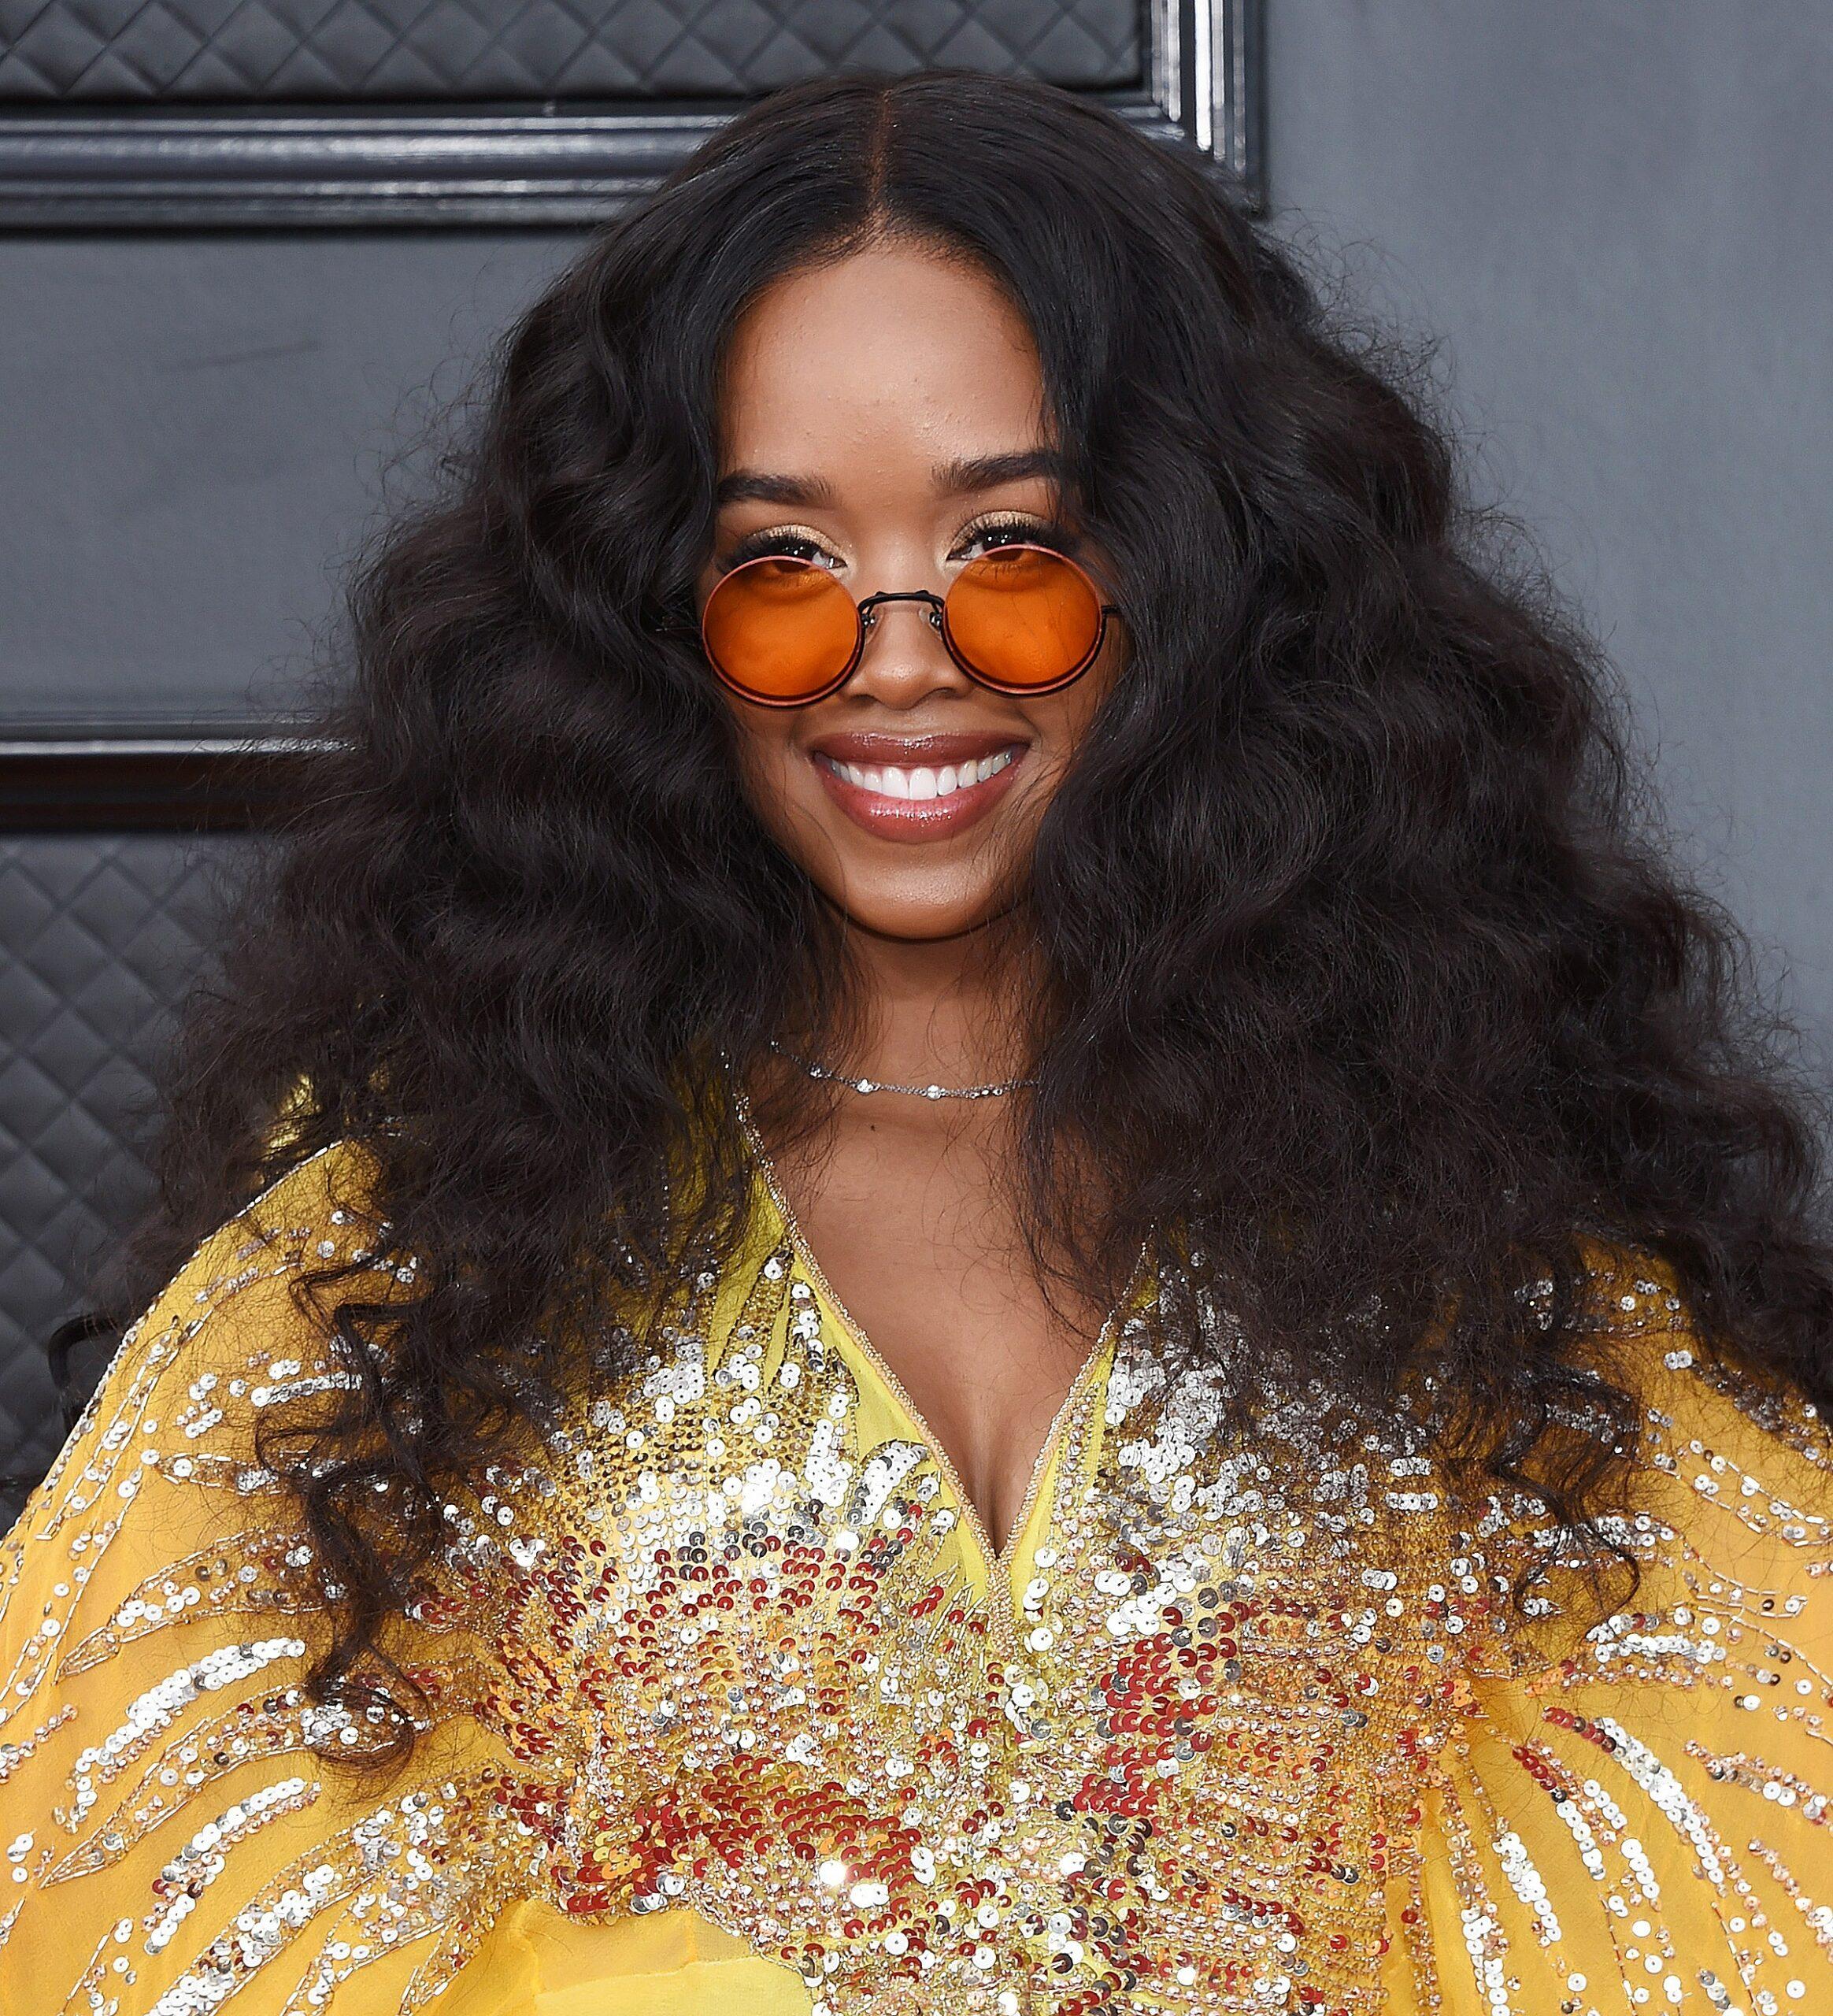 H.E.R. is cast as Belle for 'Beauty and the Beast' anniversary remake